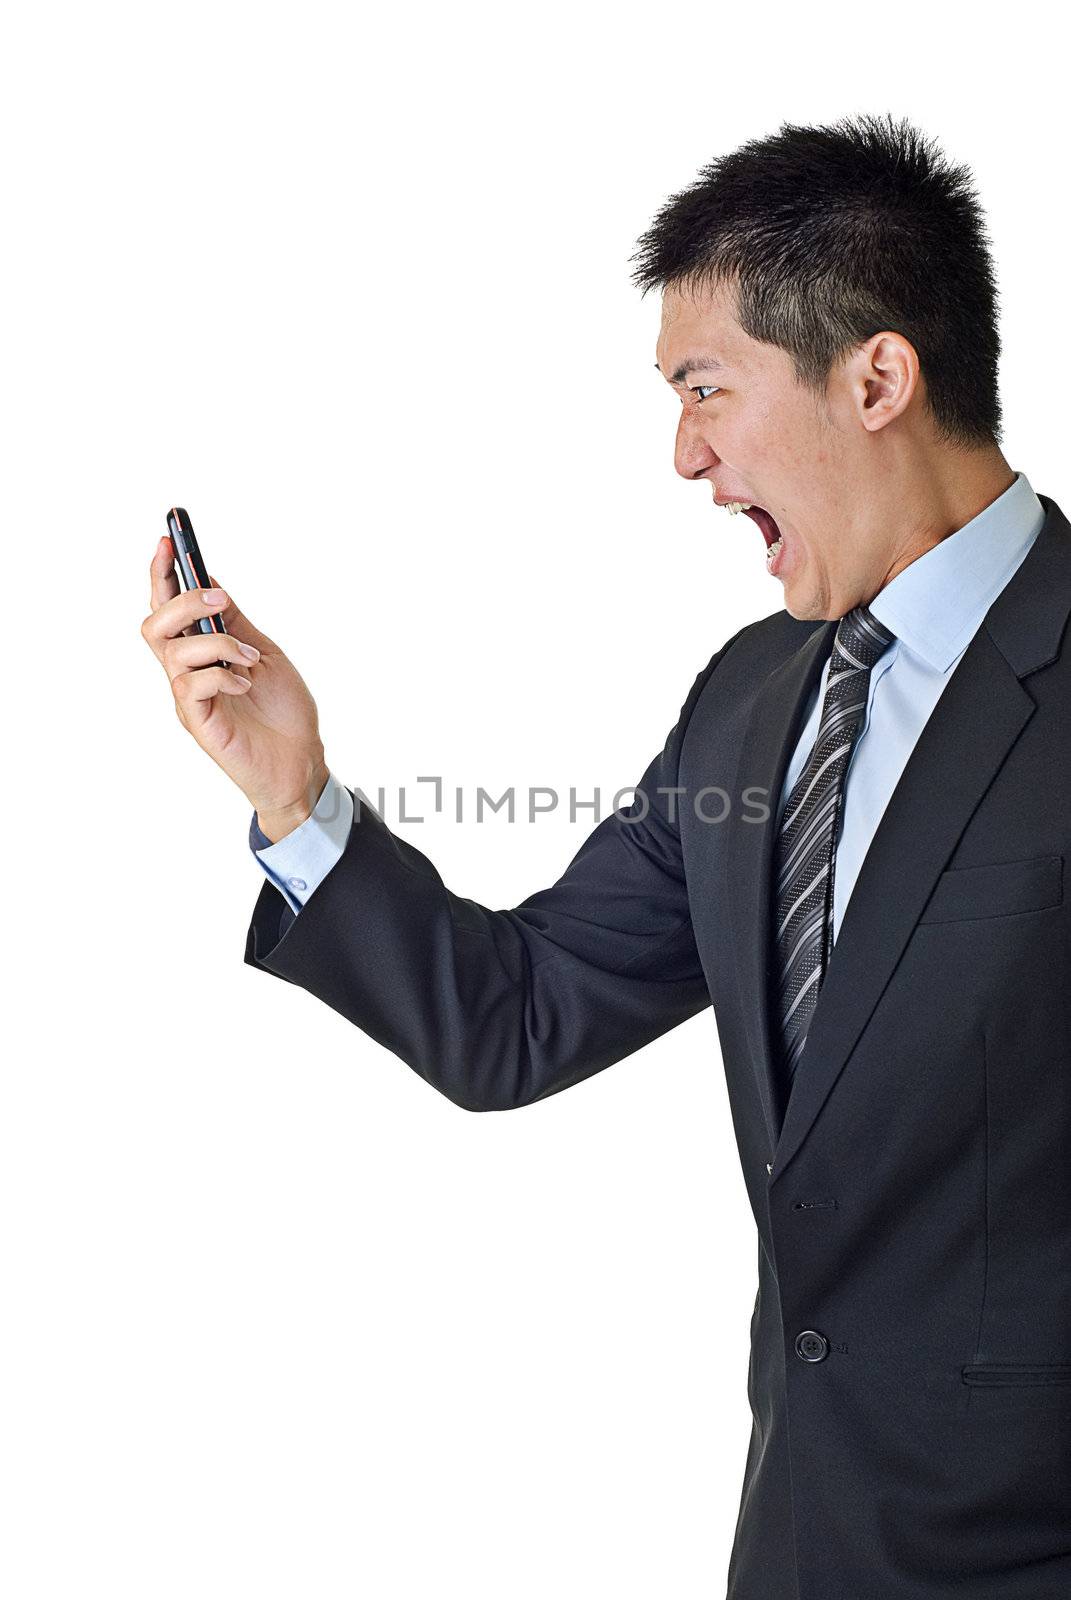 Angry businessman yelling to cellphone on white background.